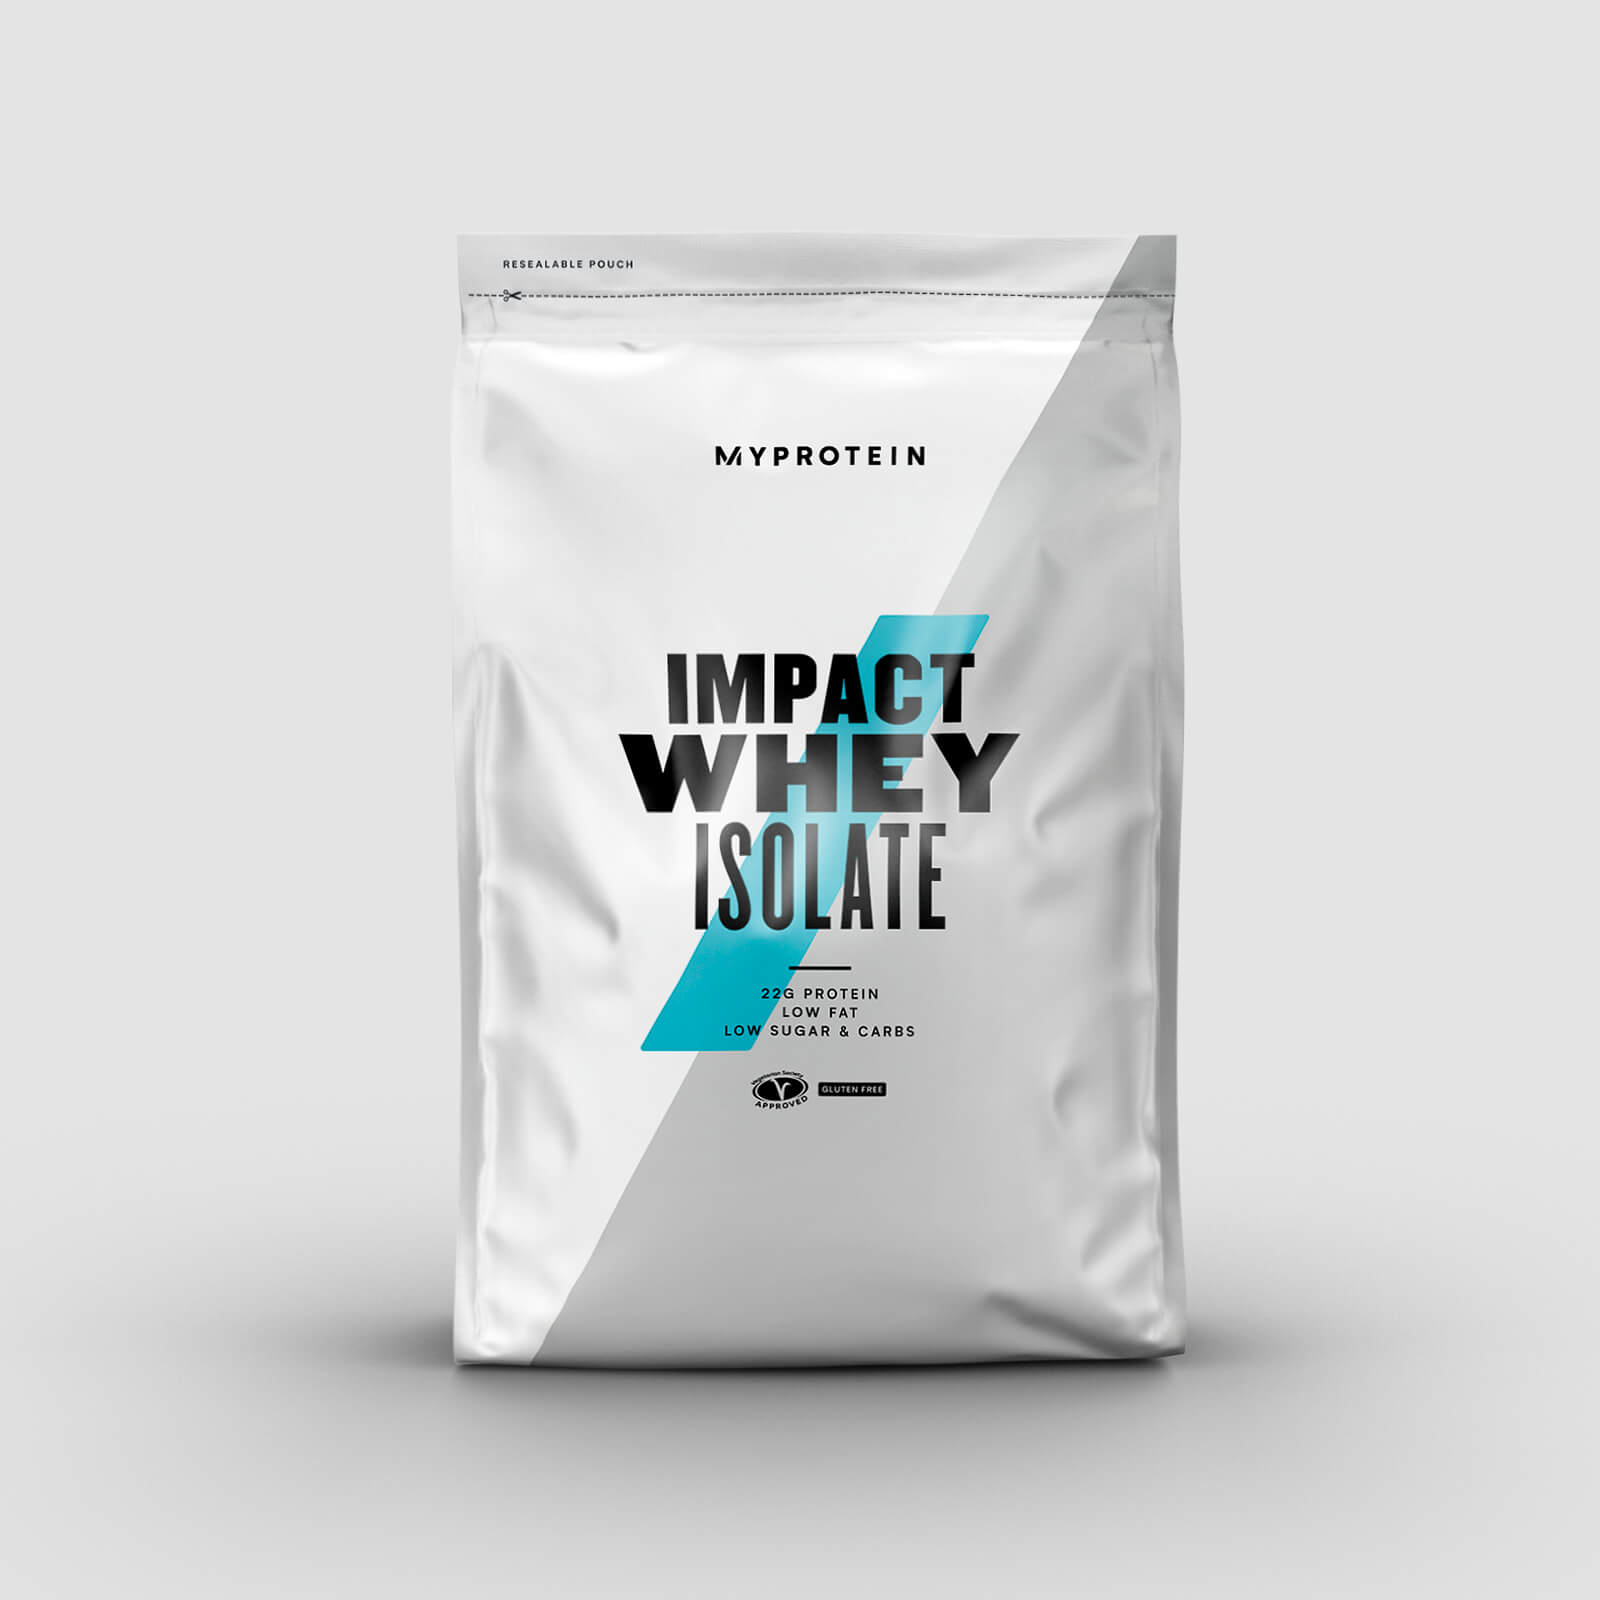 Best Whey Protein in India -Myprotein Whey isolate